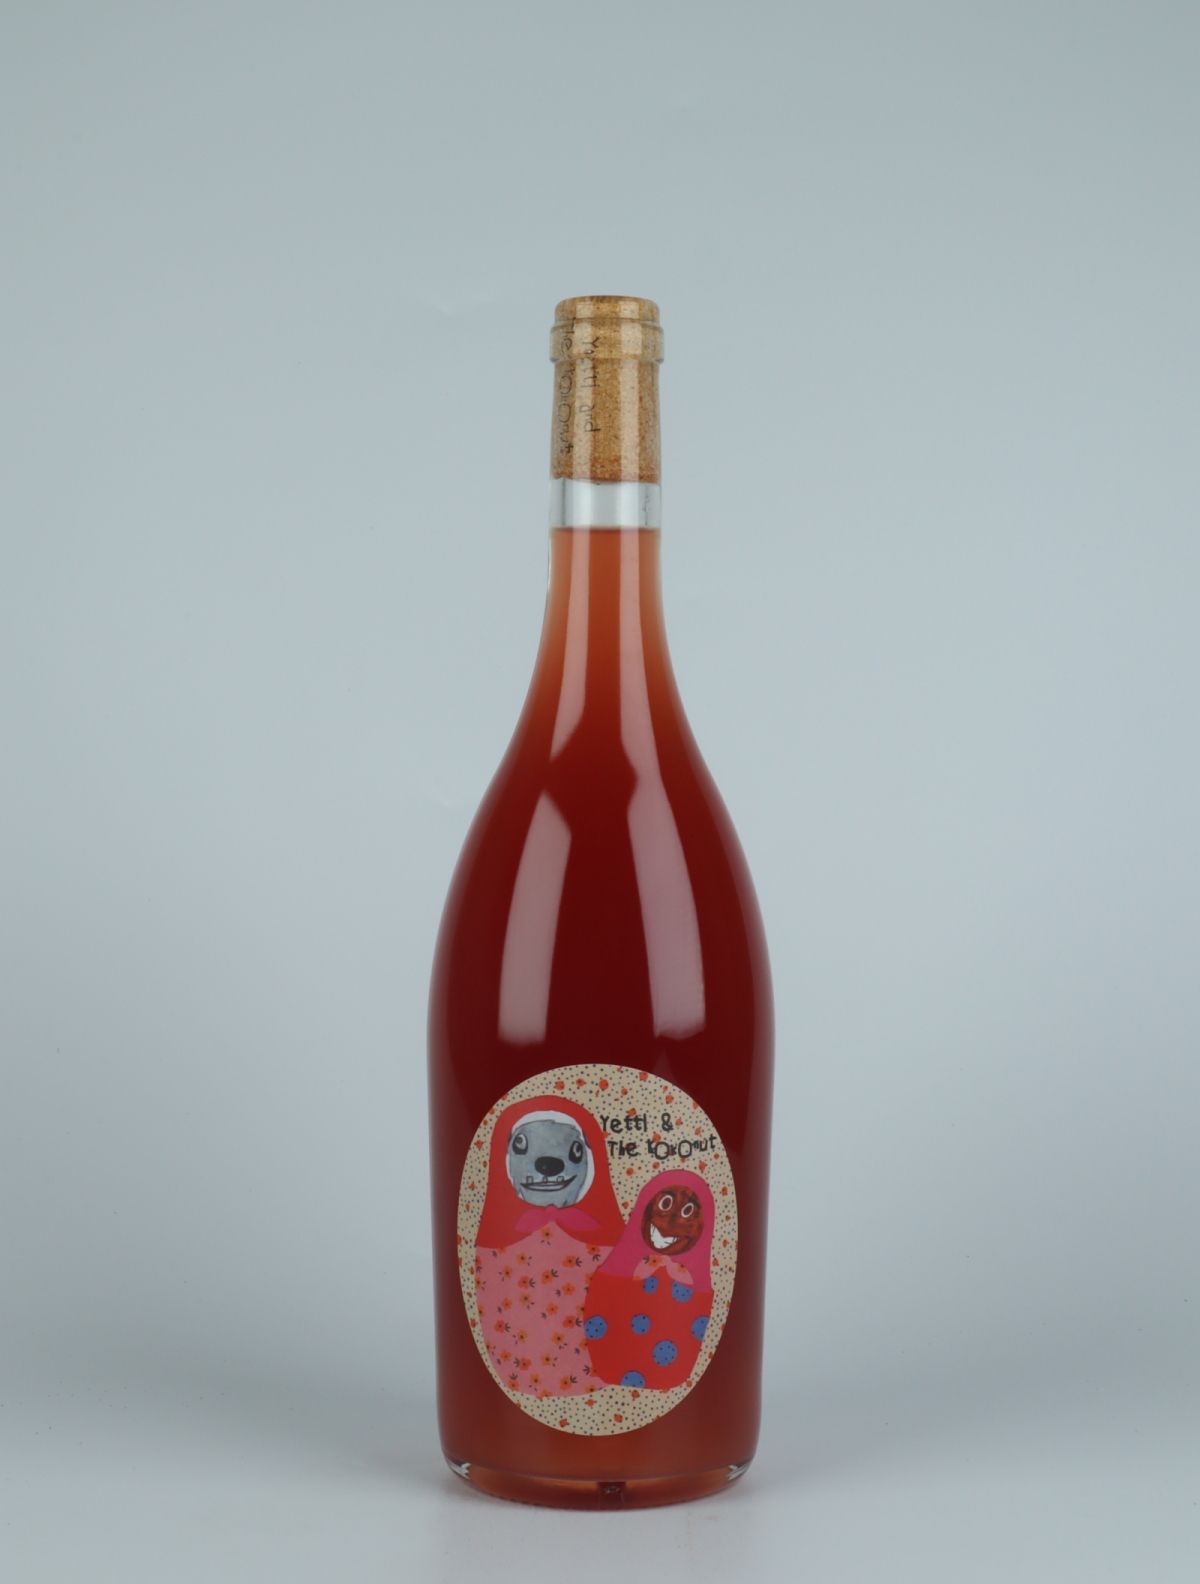 A bottle 2021 Red Muscat Red wine from Yetti and the Kokonut, Adelaide Hills in Australia